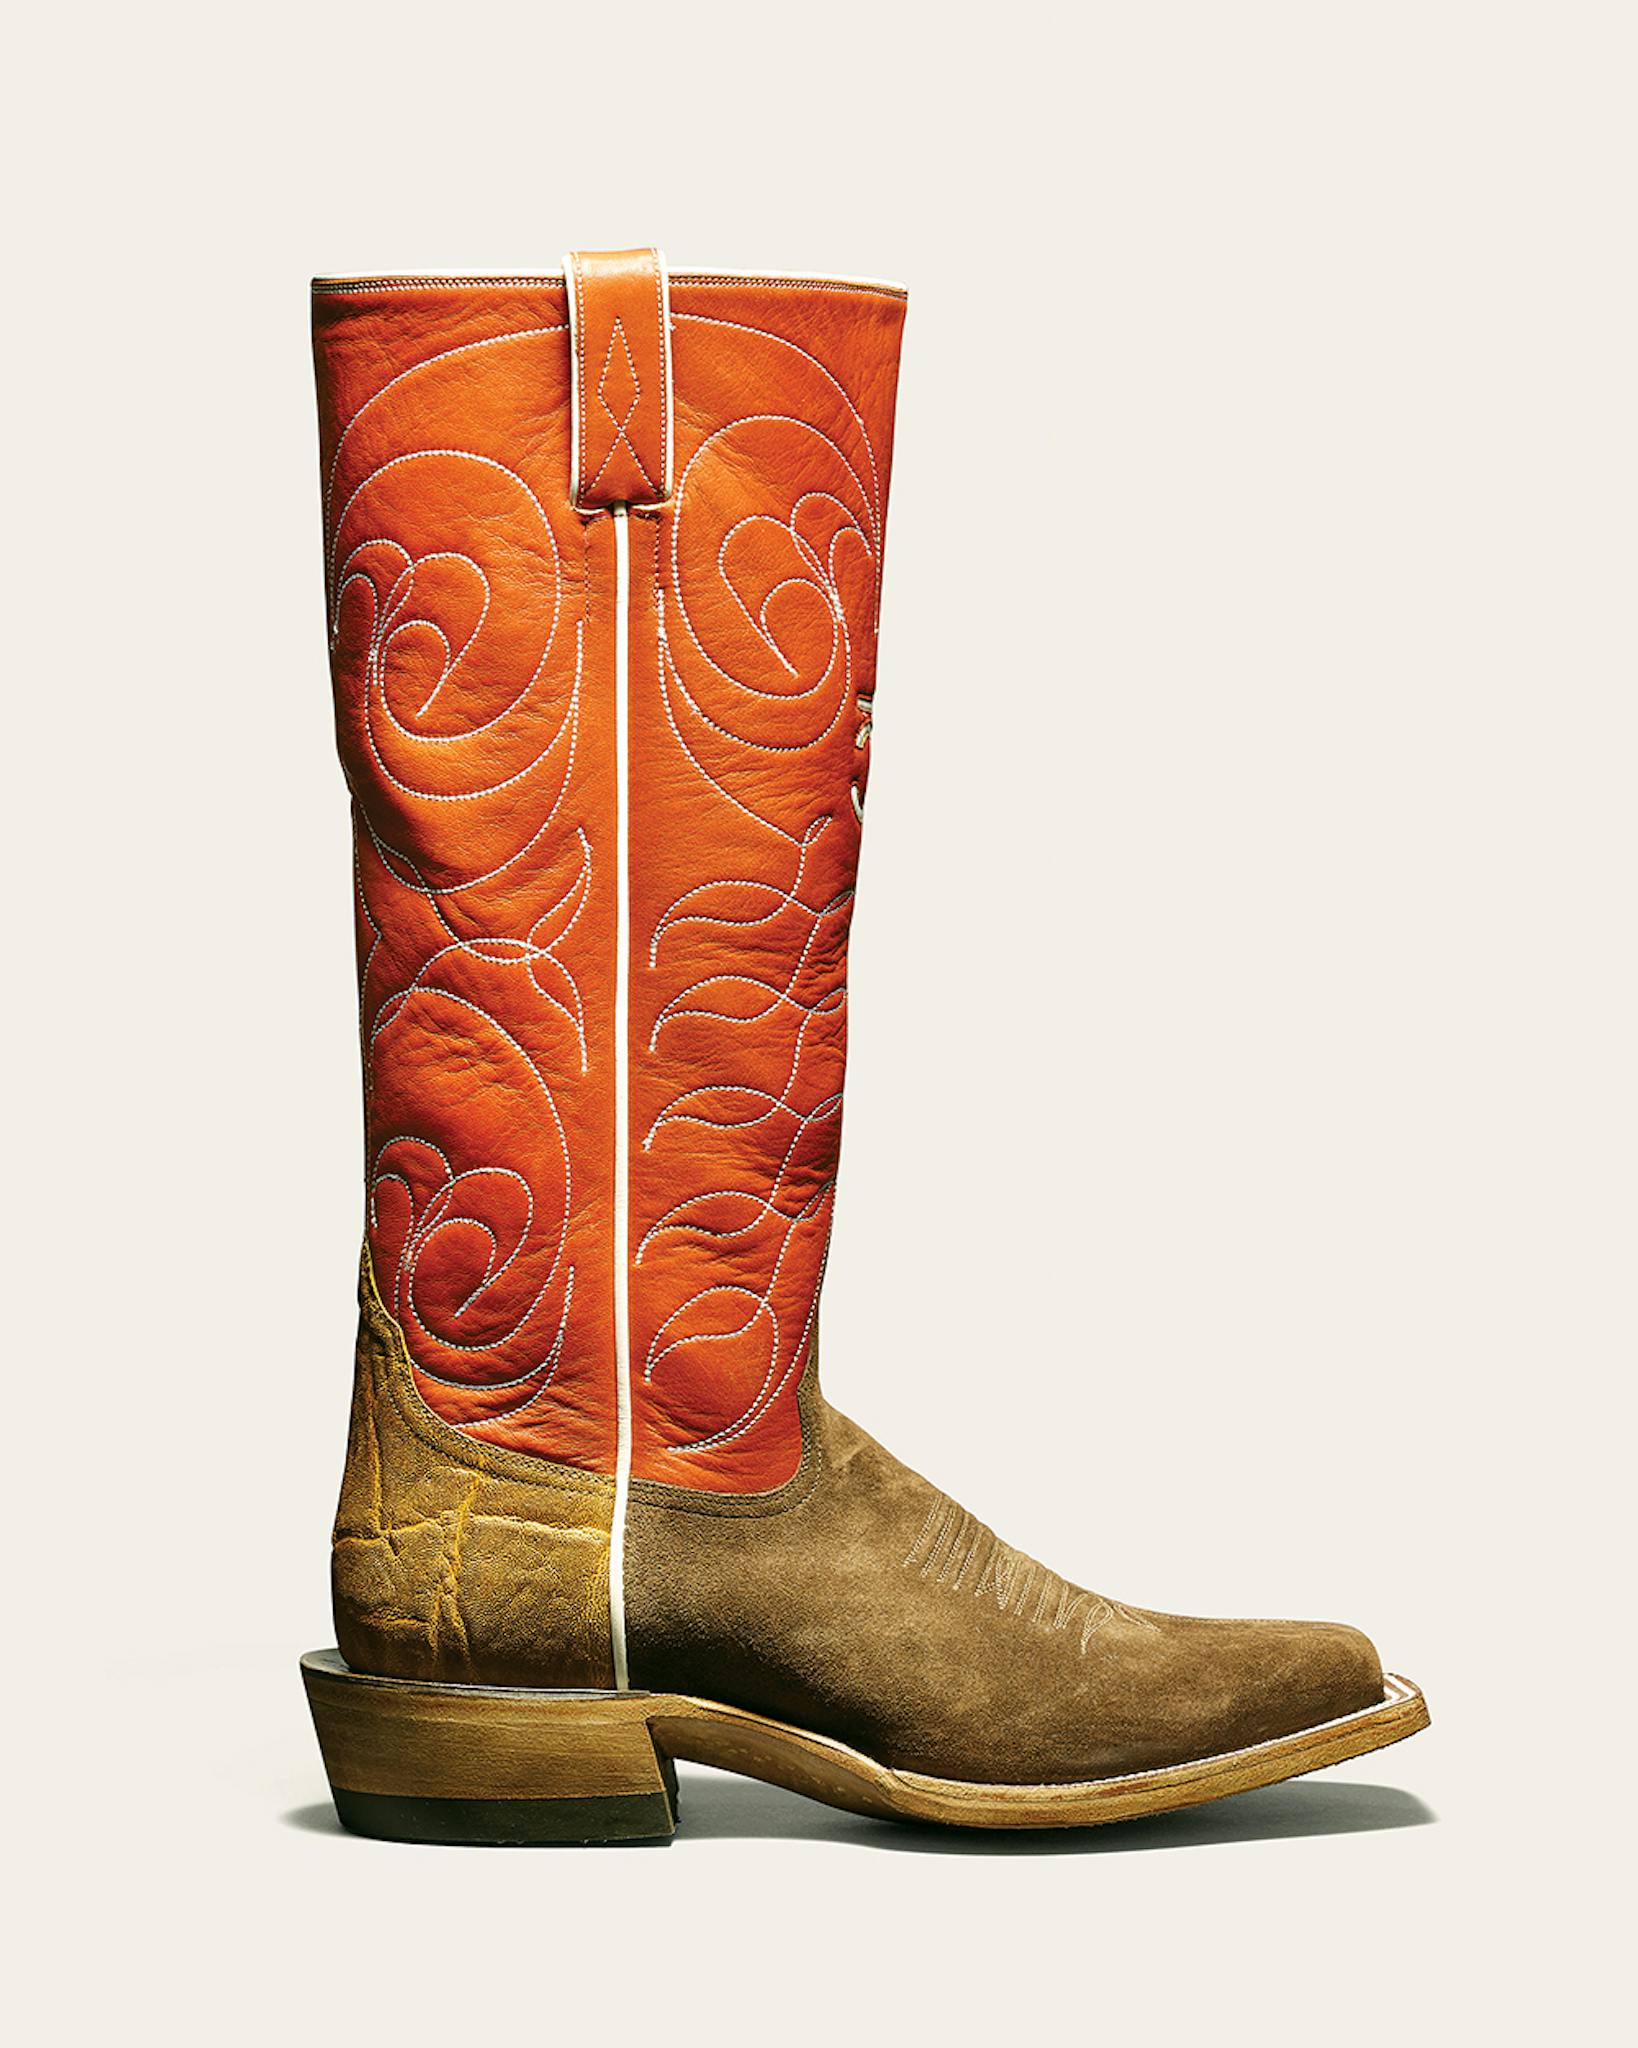 Kimmel Boot Company boot with red shaft and brown vamp.